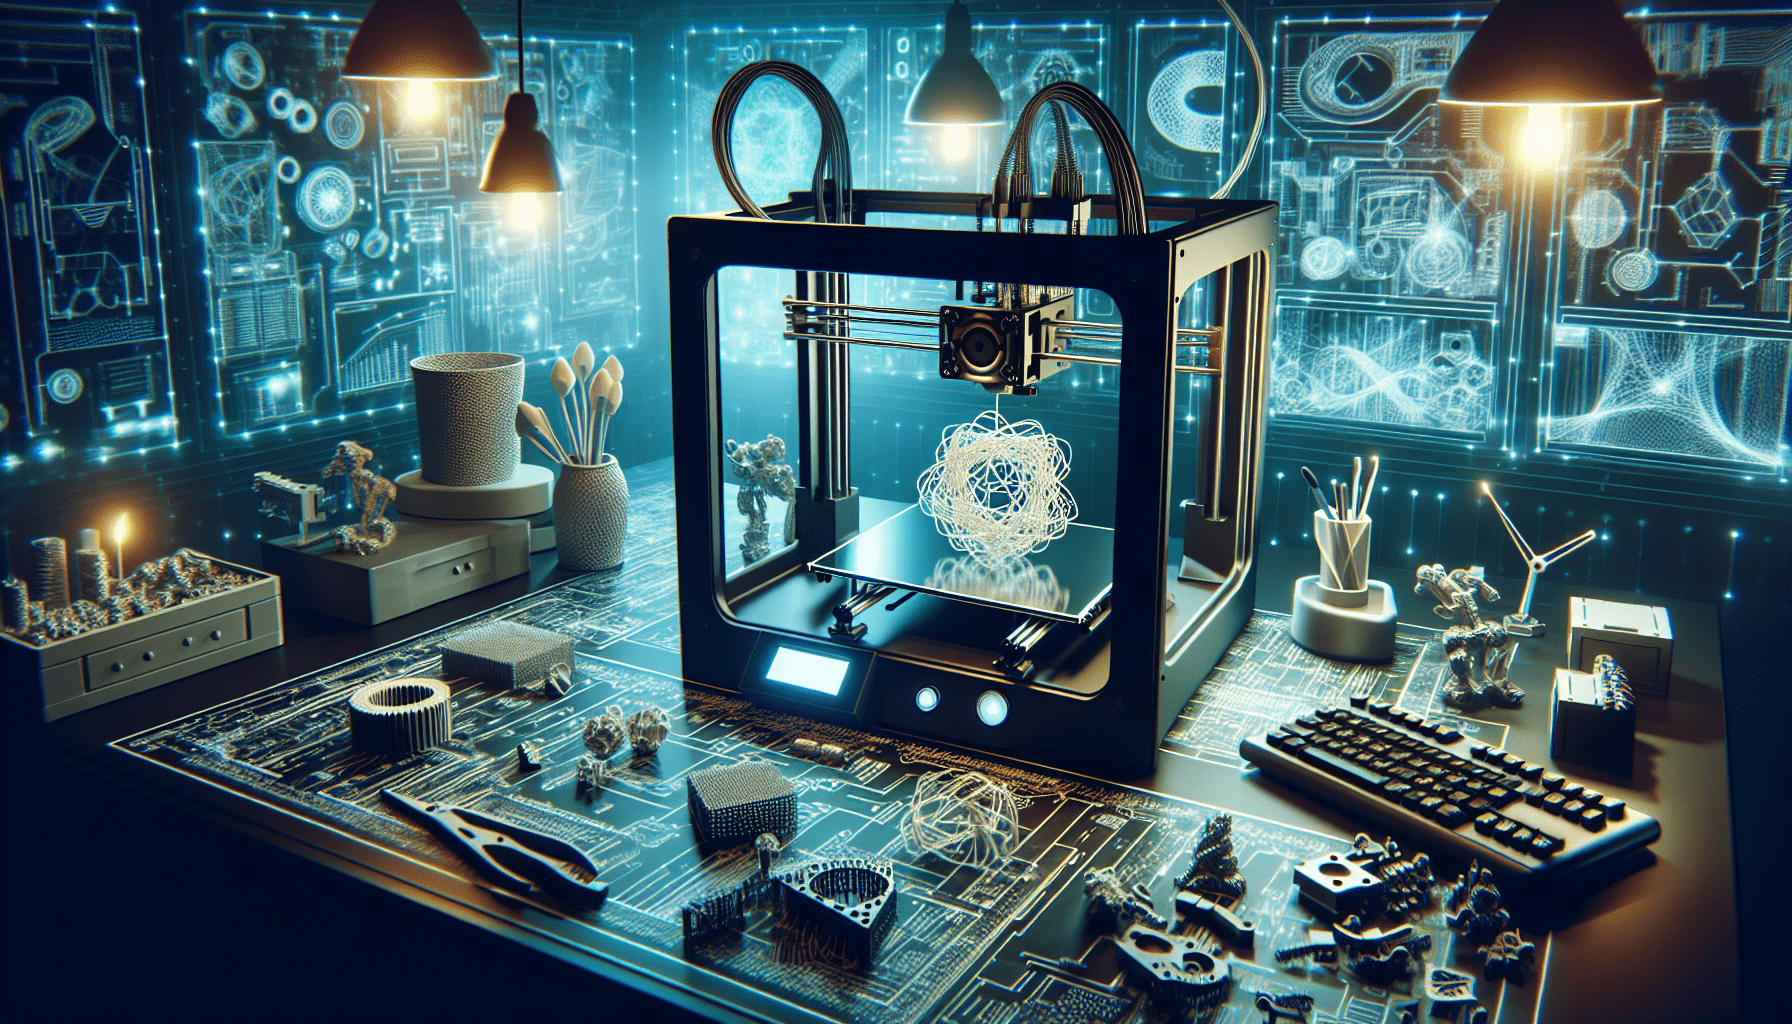 3d-printing-13-more-things-i-wish-i-knew-2021-update-1 3D Printing: 13 MORE Things I Wish I Knew: 2021 Update